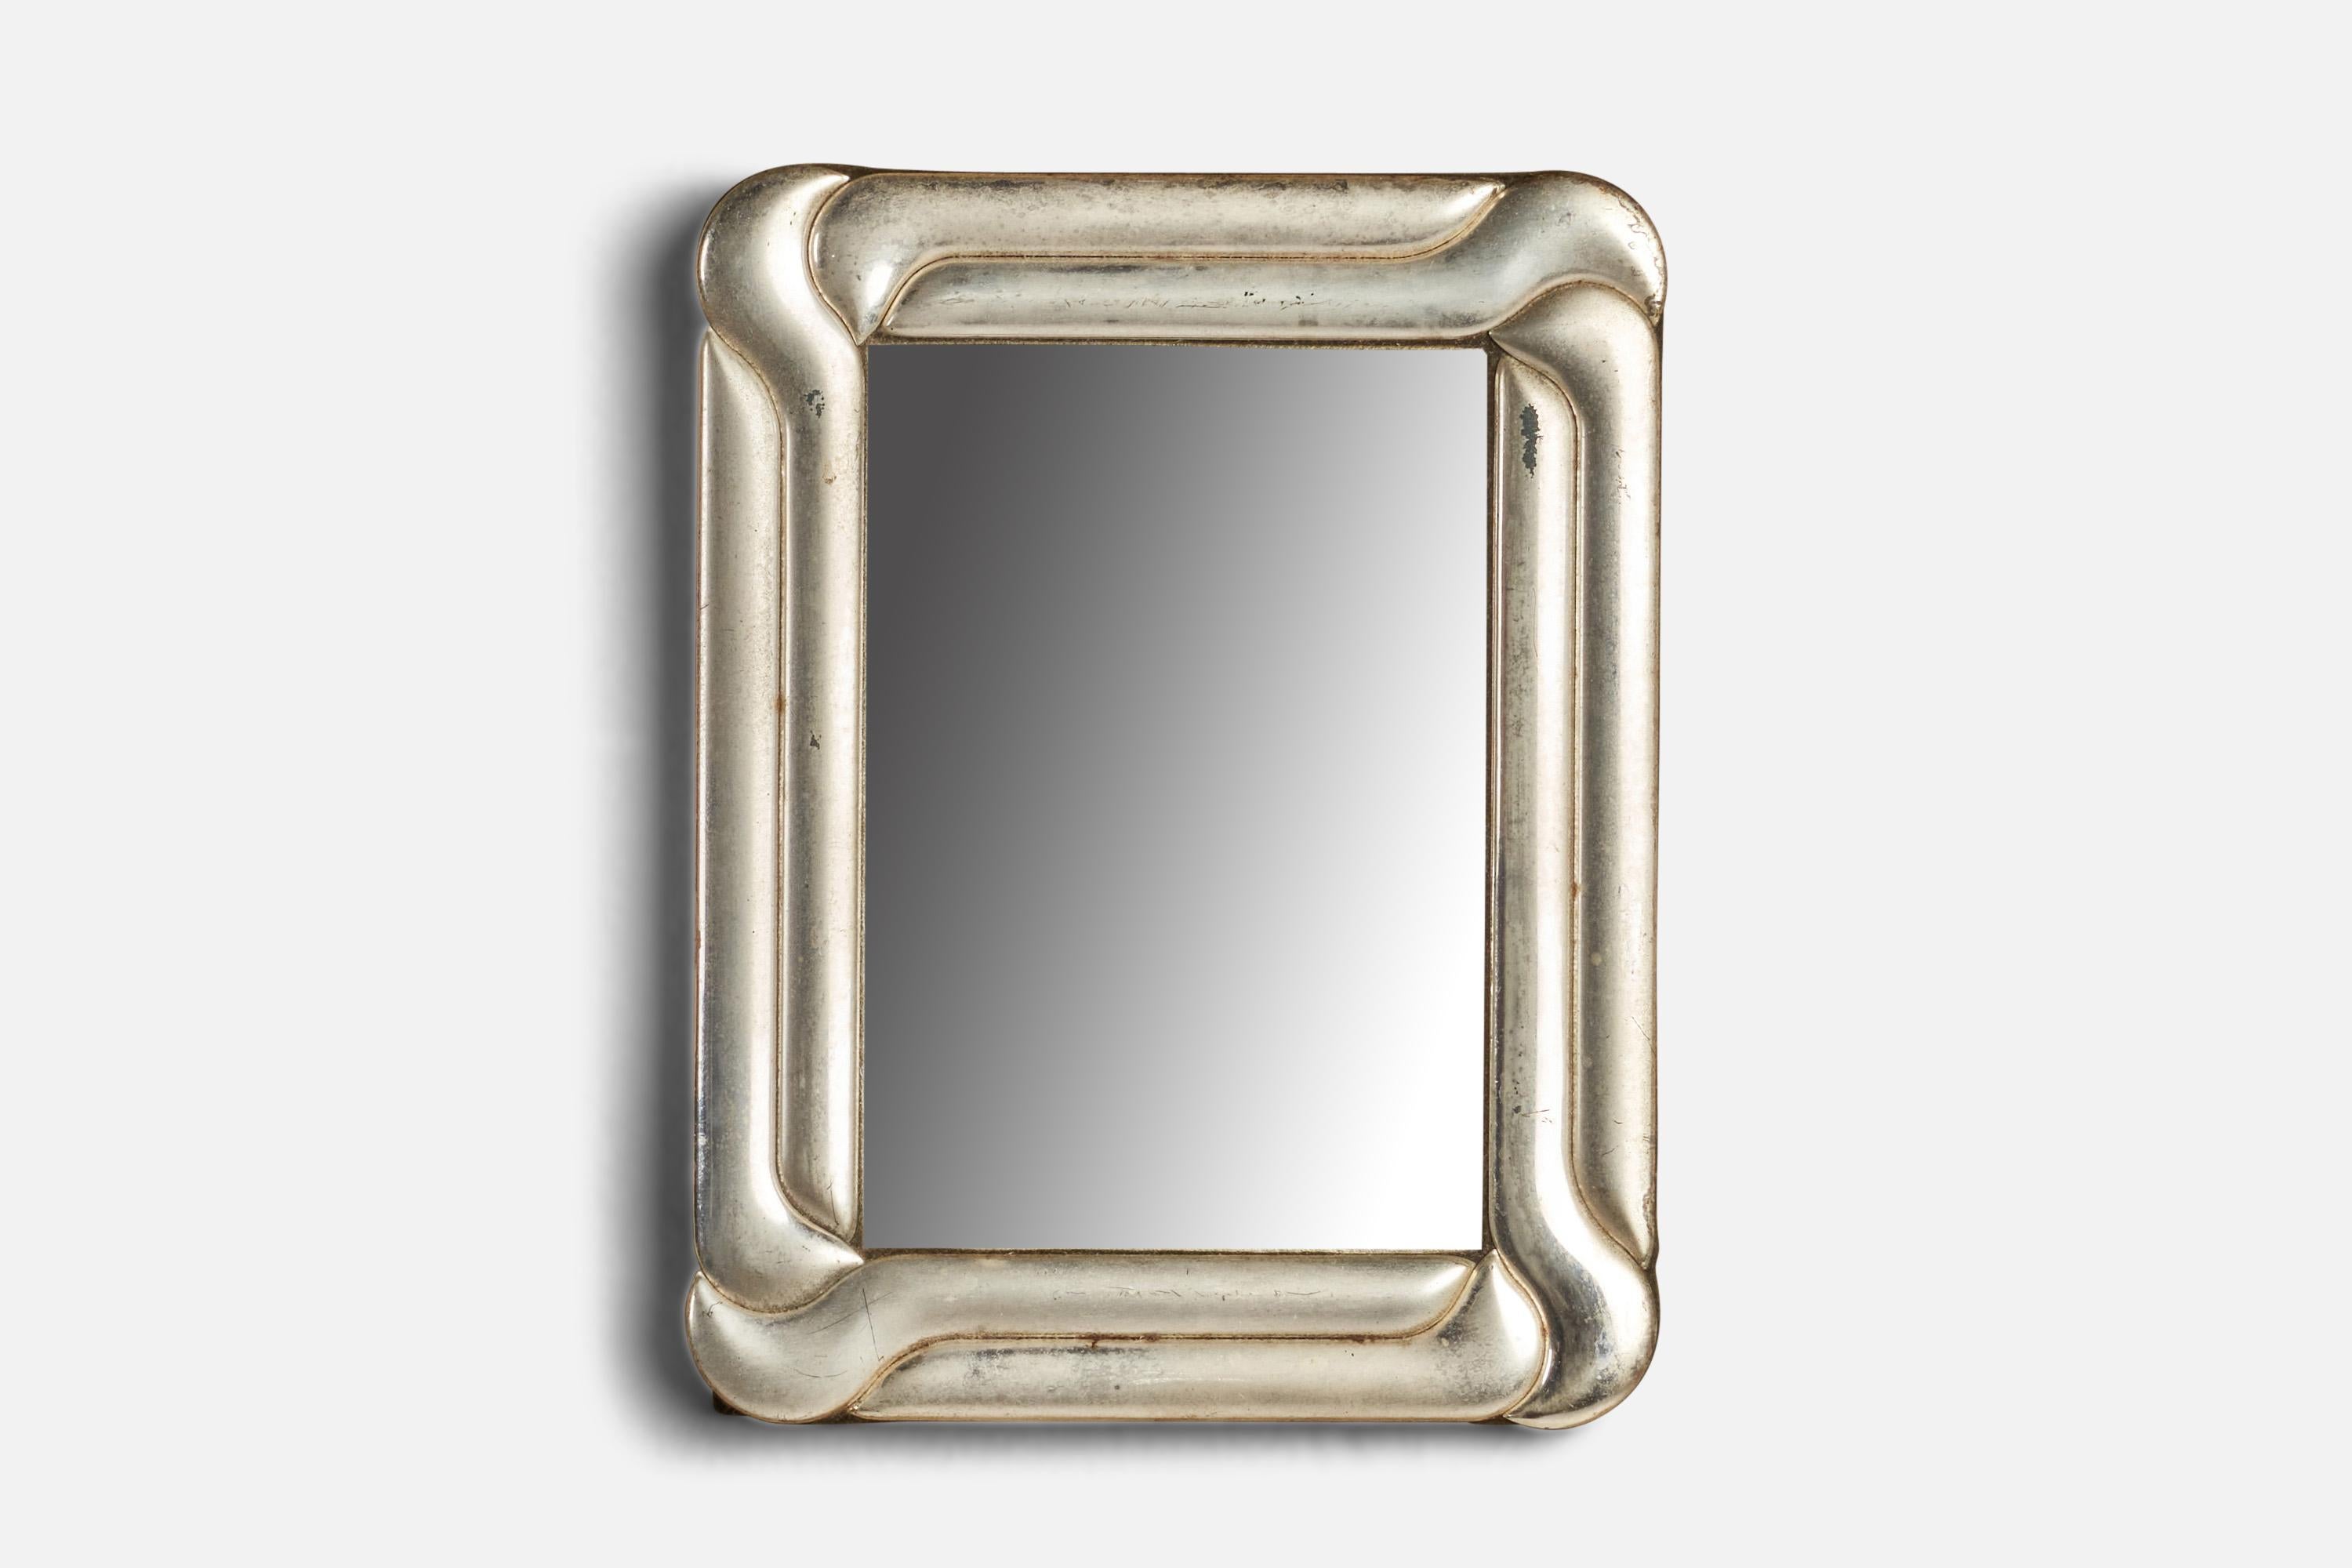 A small sterling silver wall or table mirror designed and produced in Italy, 1930s.